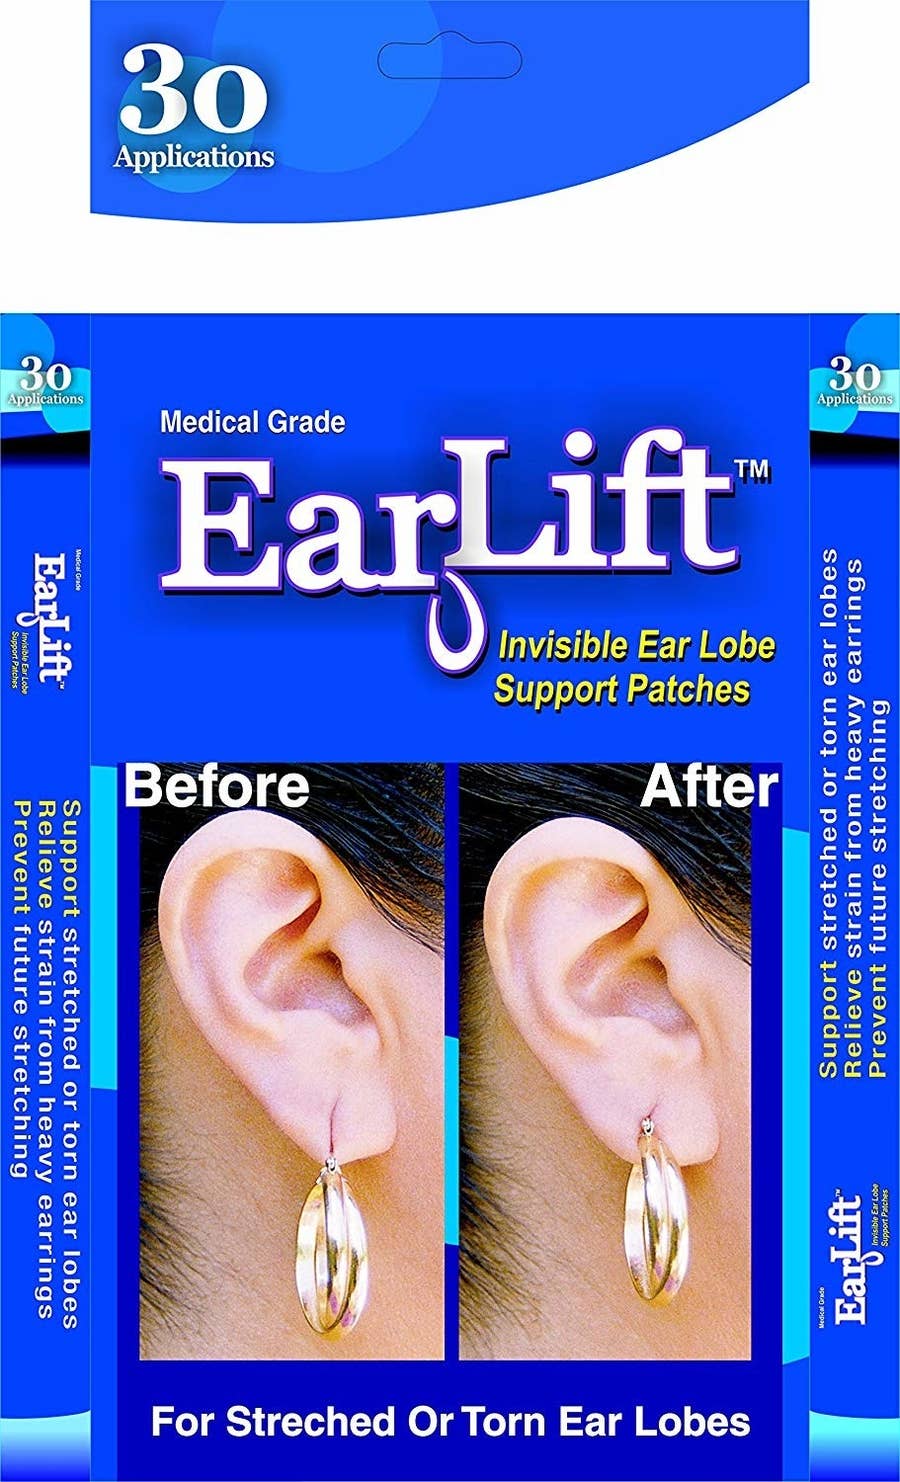 Earlift Earring Support Patches - 10 Pack (600 patches)